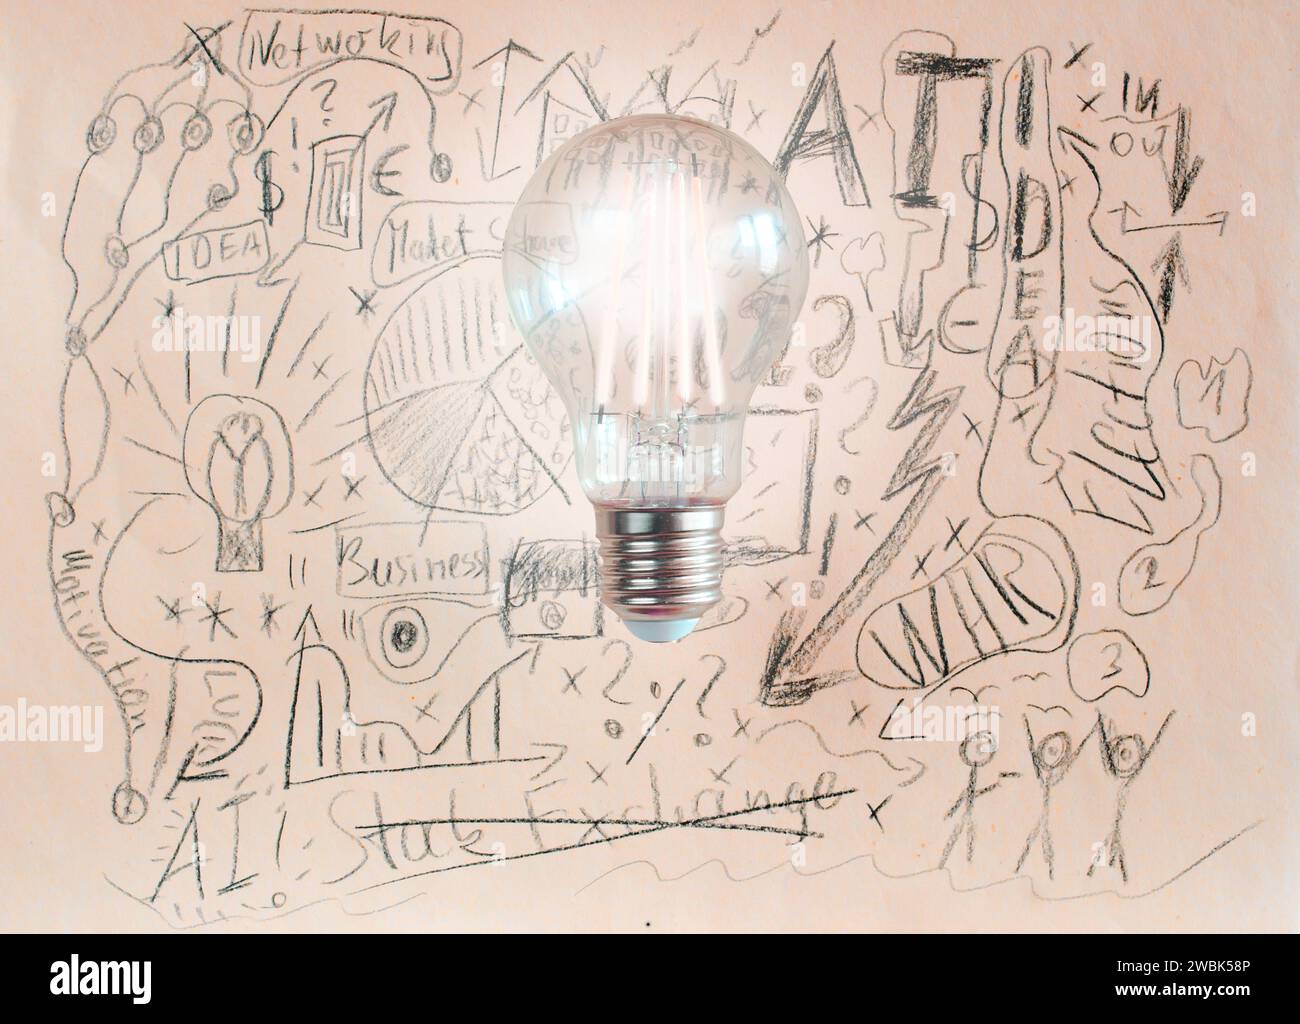 Idea,innovation,creativity human resources and problem solving business concept with lightbulb and business scribble Stock Photo